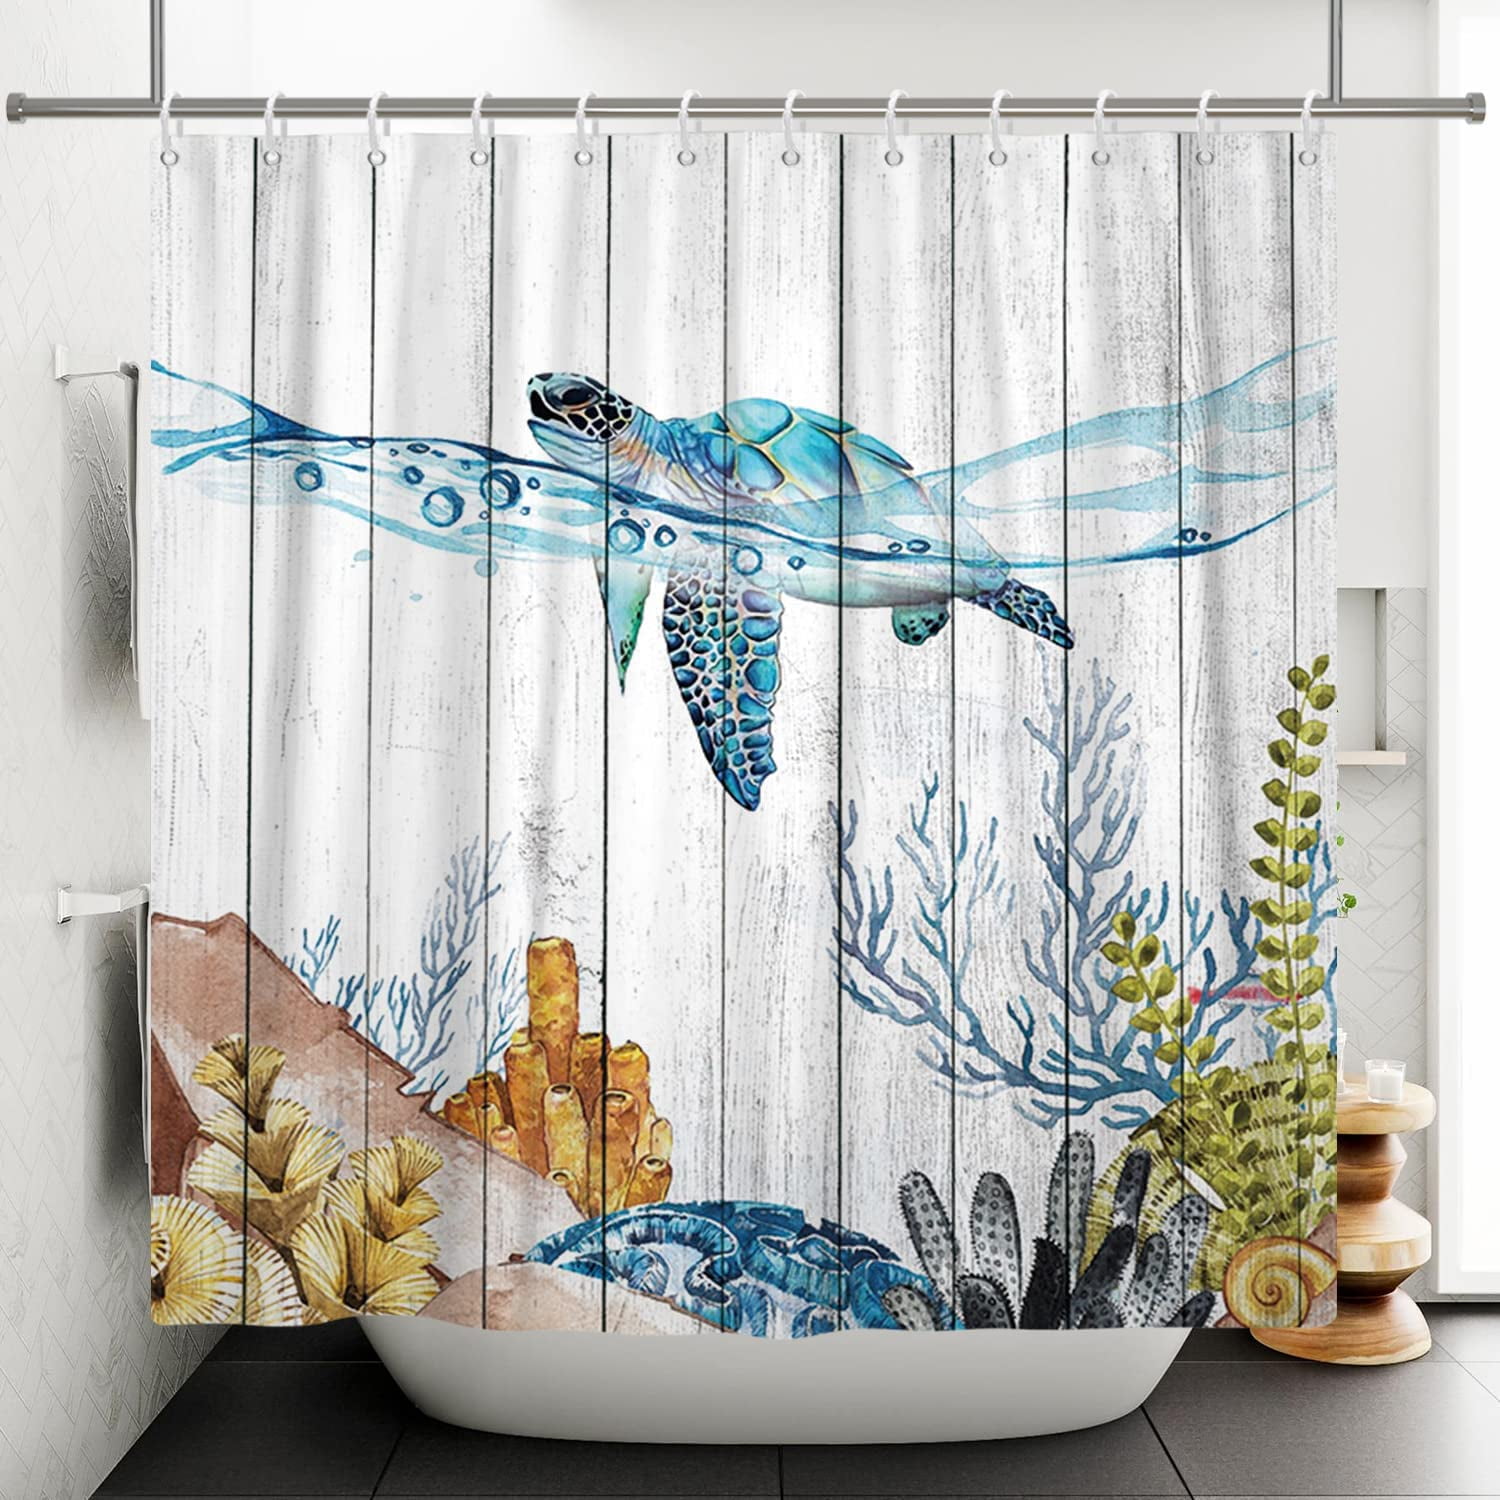 Fish and Ocean Theme Bath Towels and Decor